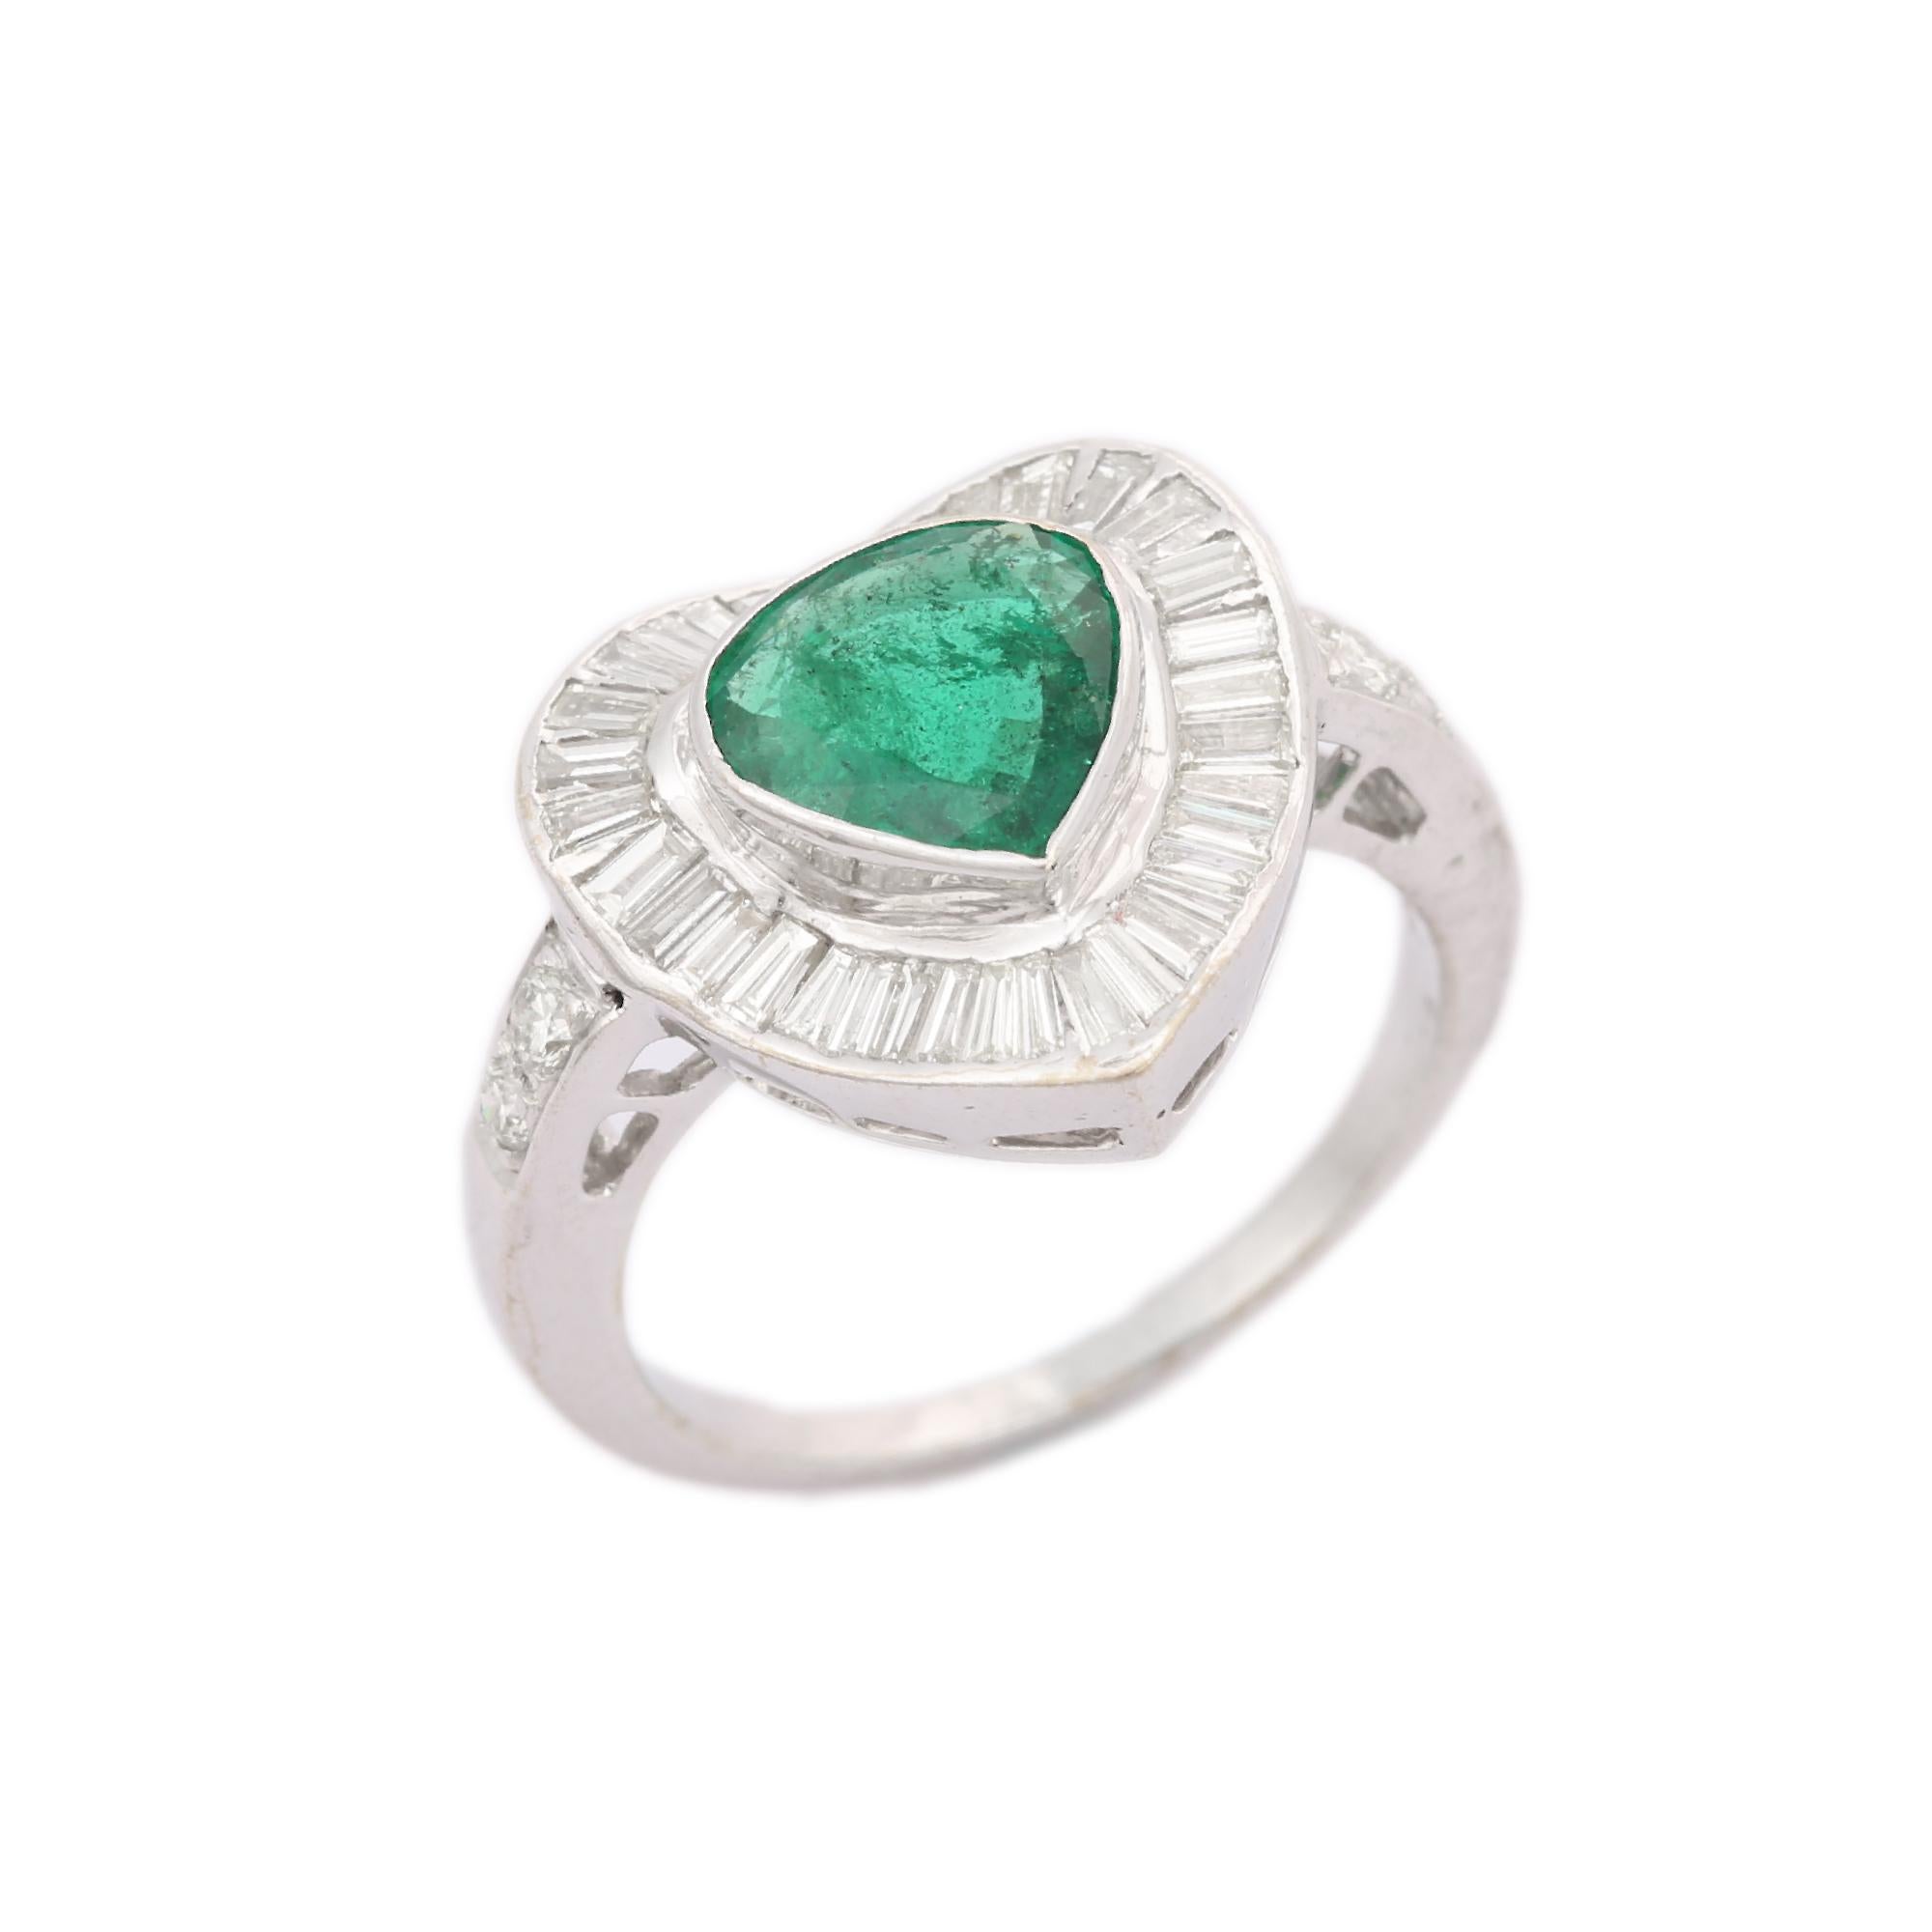 For Sale:  Emerald Diamond Heart Shape Wedding Ring in 18kt Solid White Gold 2